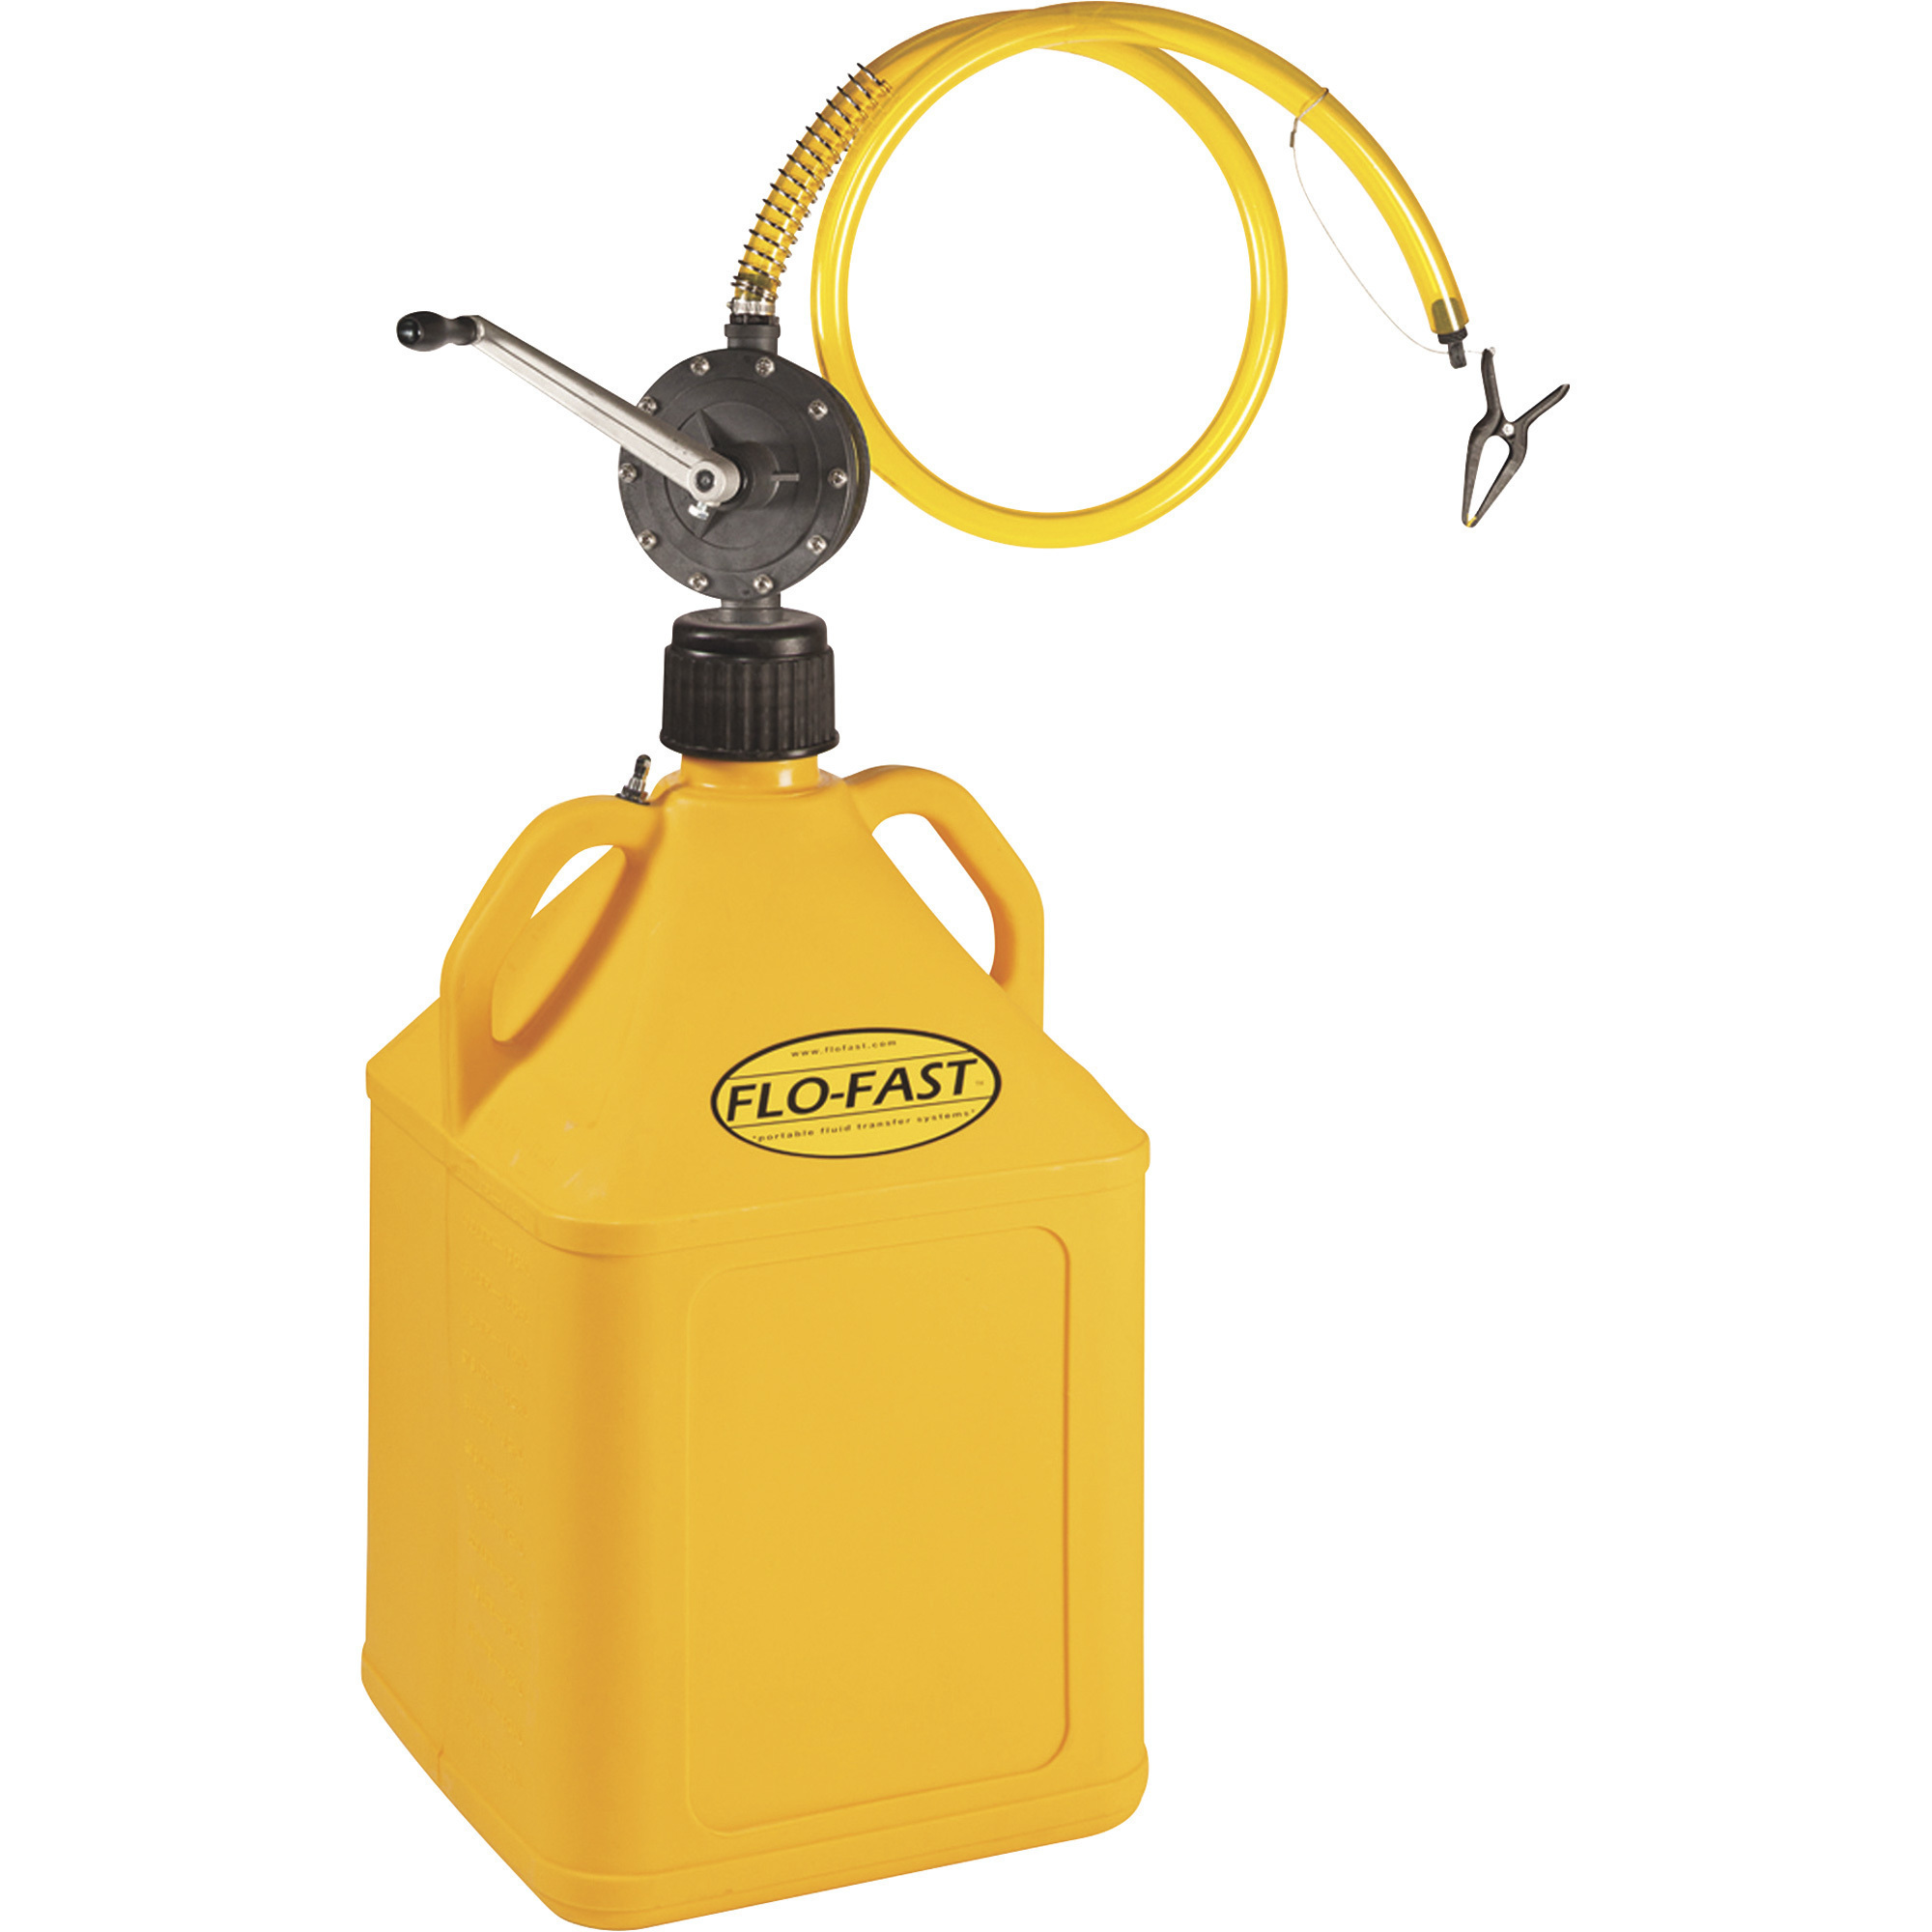 FLO-FAST Container With Pump, 15-Gallon, Yellow, For Diesel, Model 31005-Y